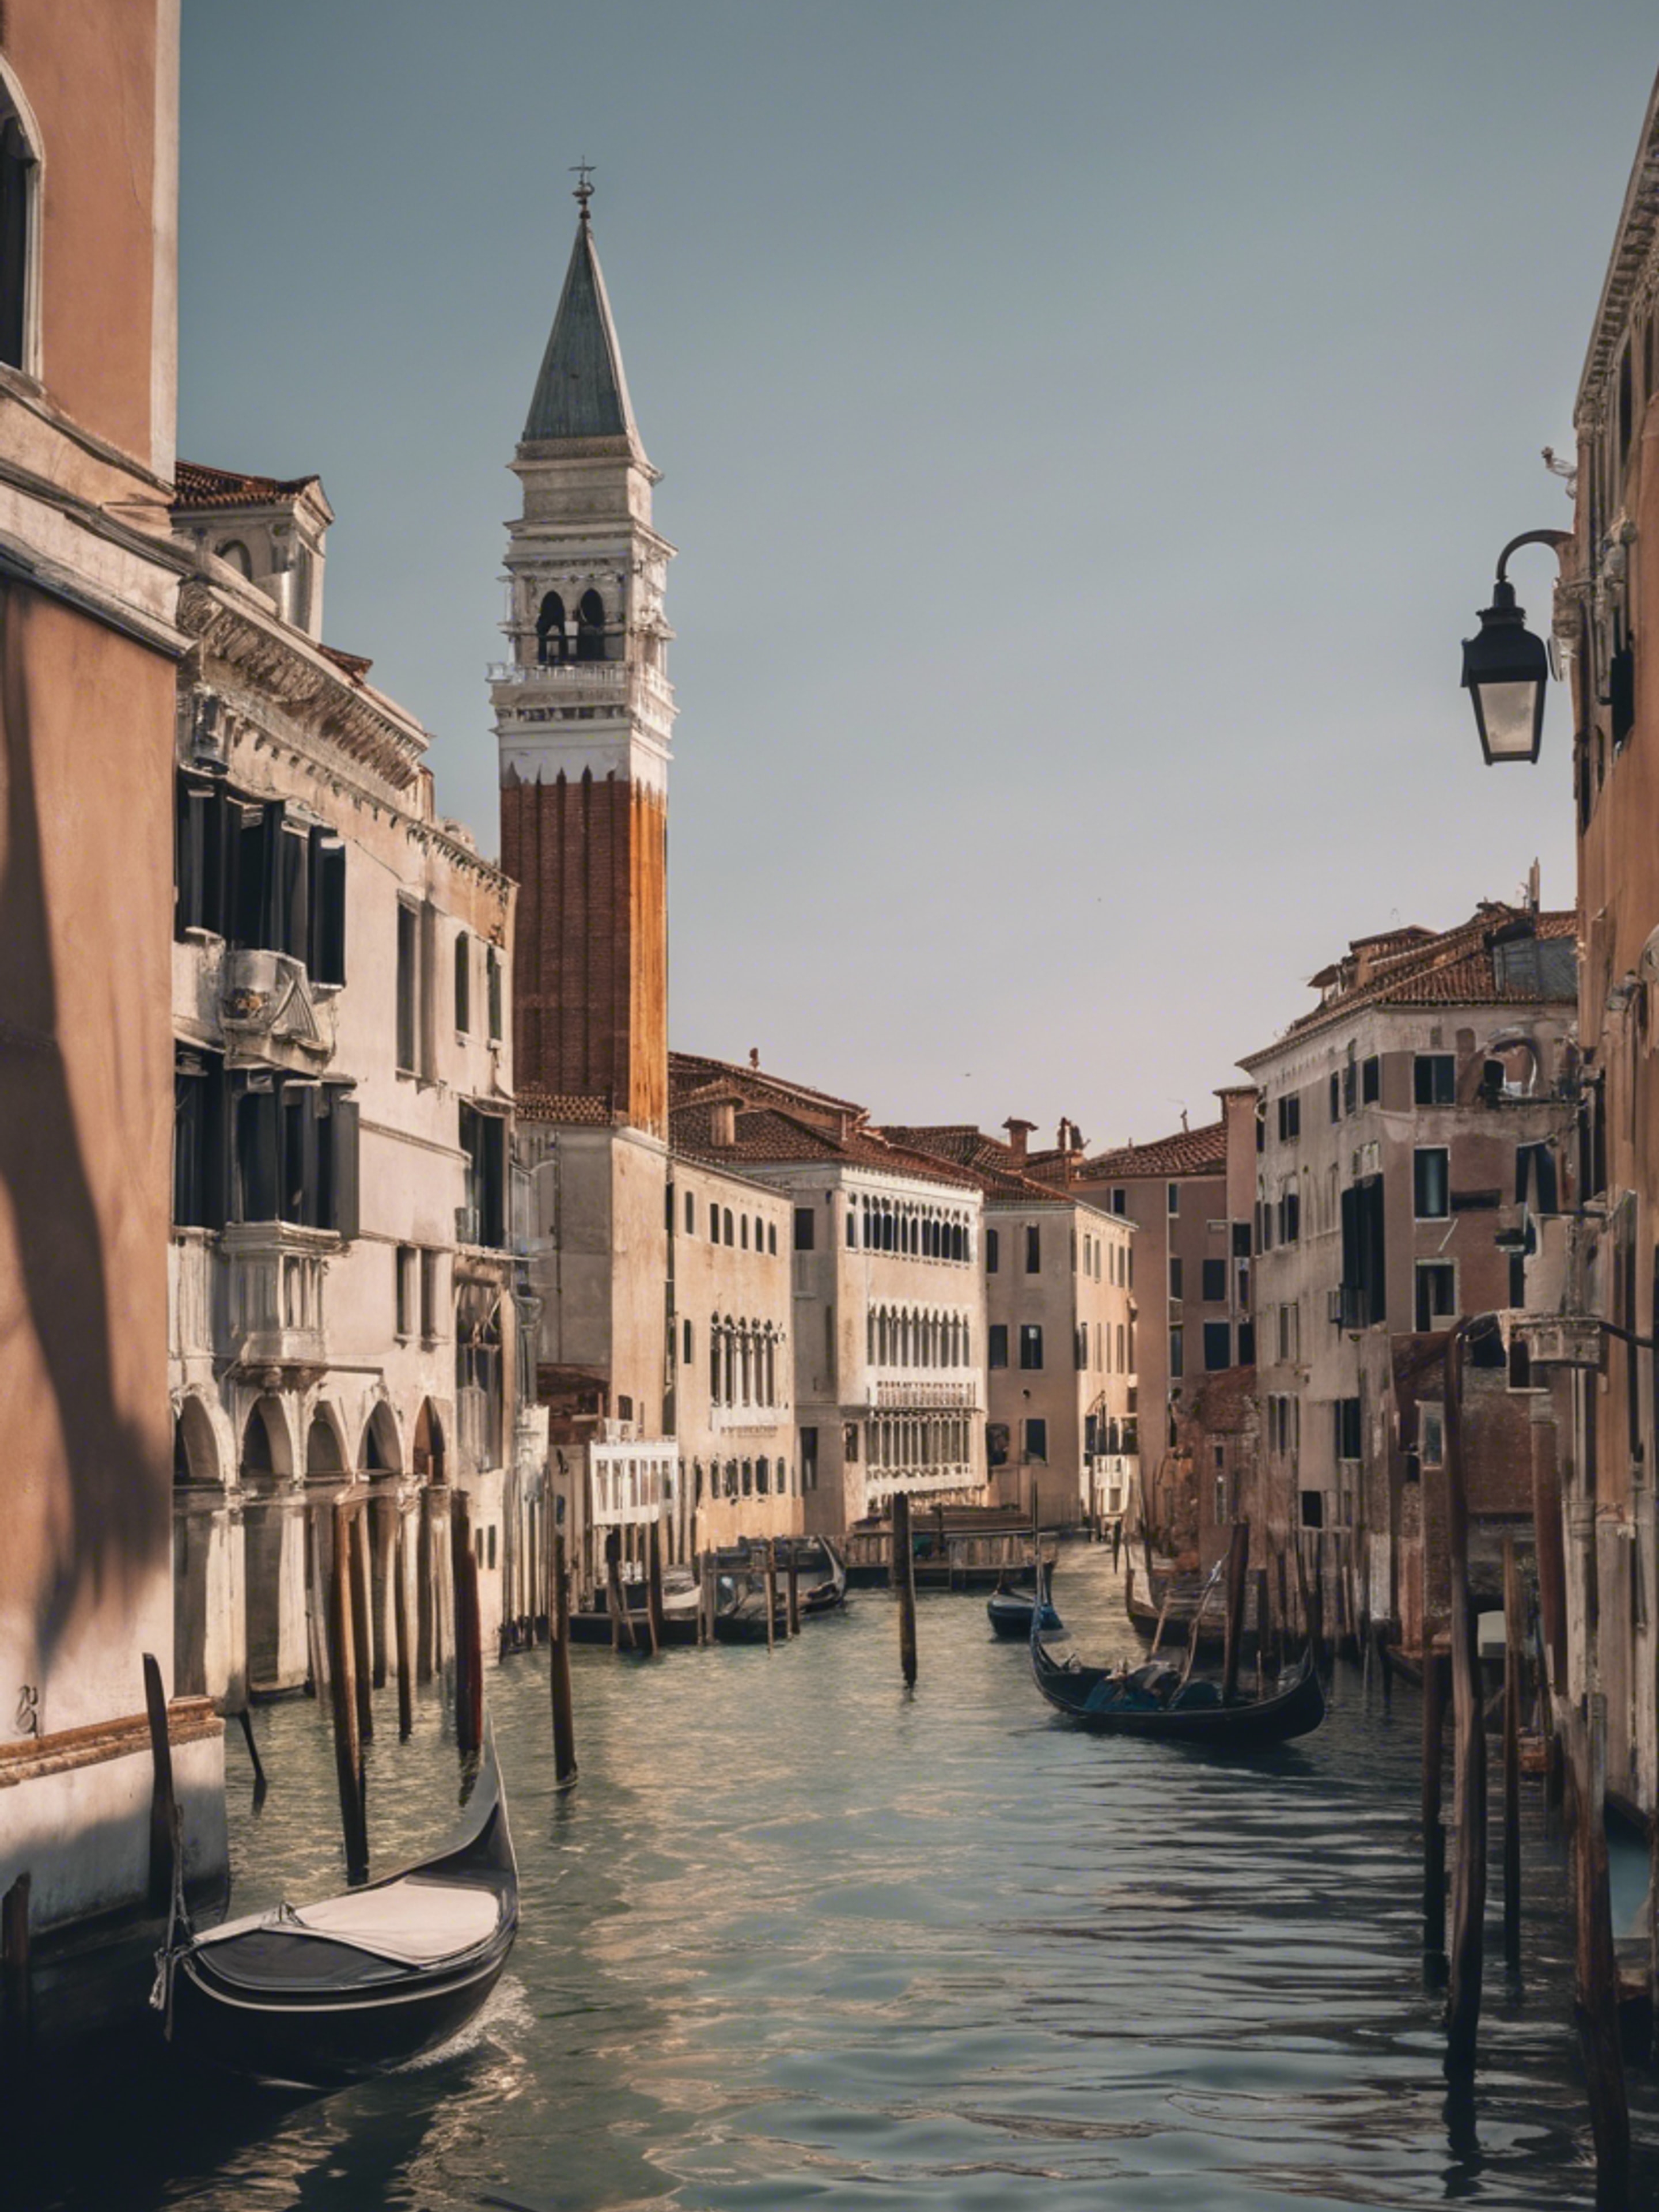 The enchanting skyline of Venice, showing the harmony of waterways and gothic architecture. Дэлгэцийн зураг[ea568ee278994e97af3a]